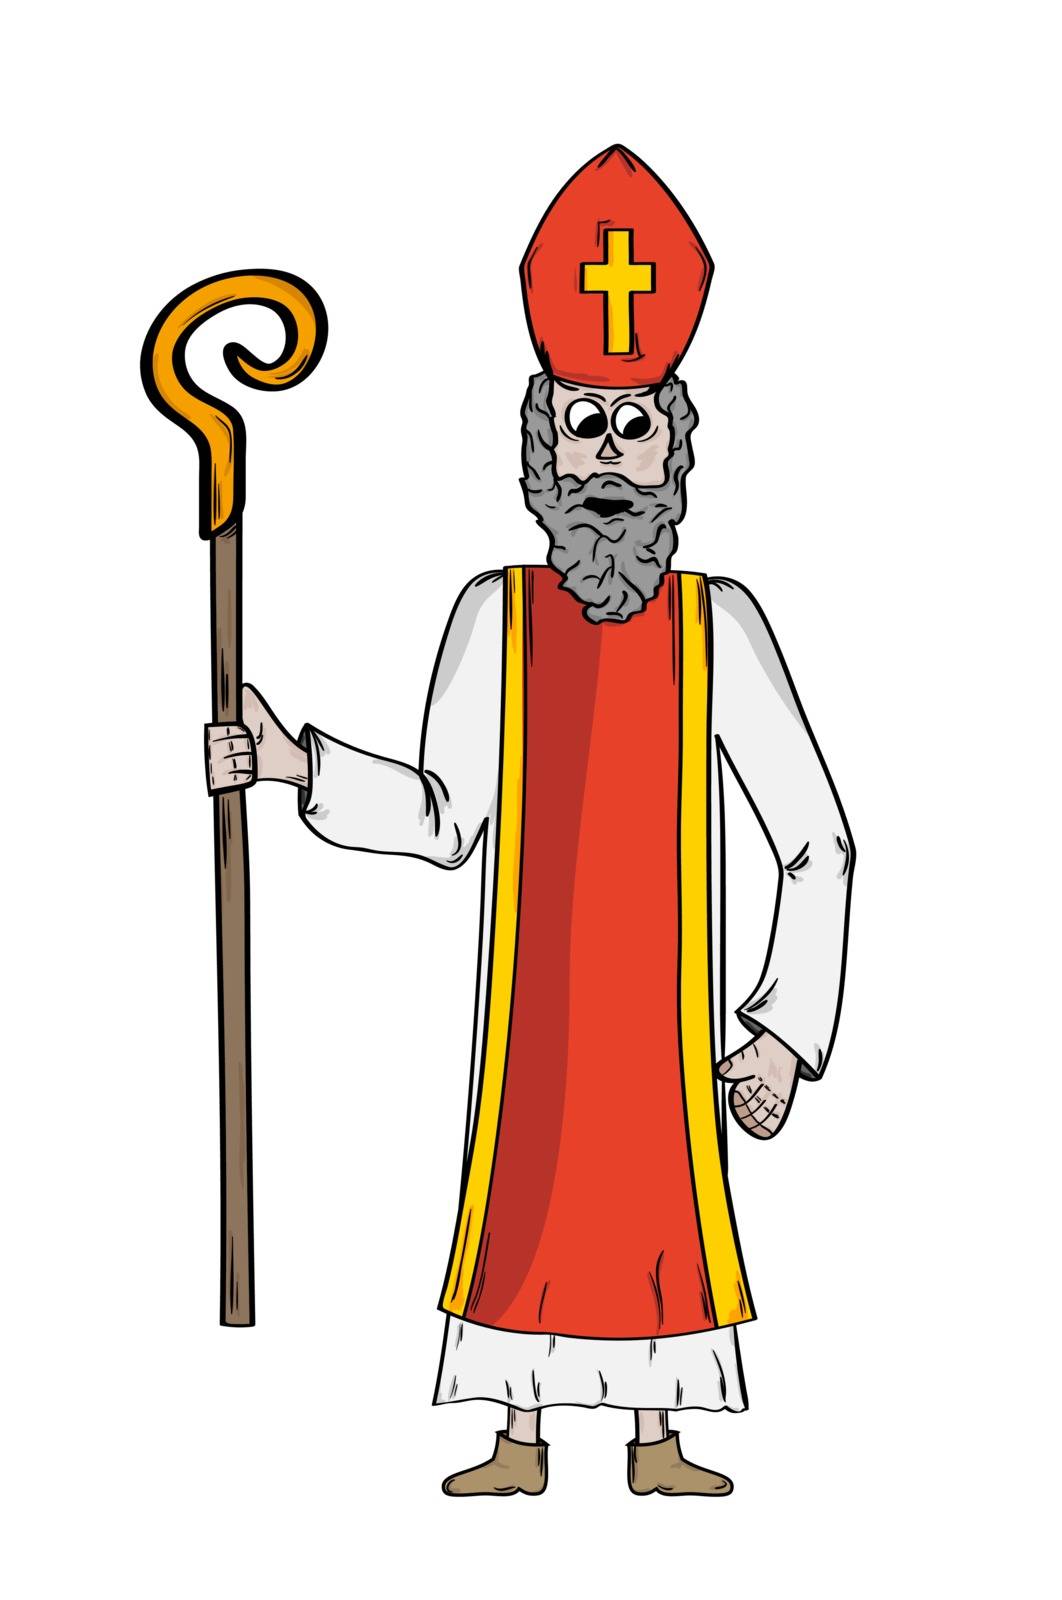 Saint Nicholas in bishop's clothing. Saint Nicholas as a symbol of goodness and wisdom and symbol of slavic Christmas. Sketch of the cartoon illustration isolated on white background.